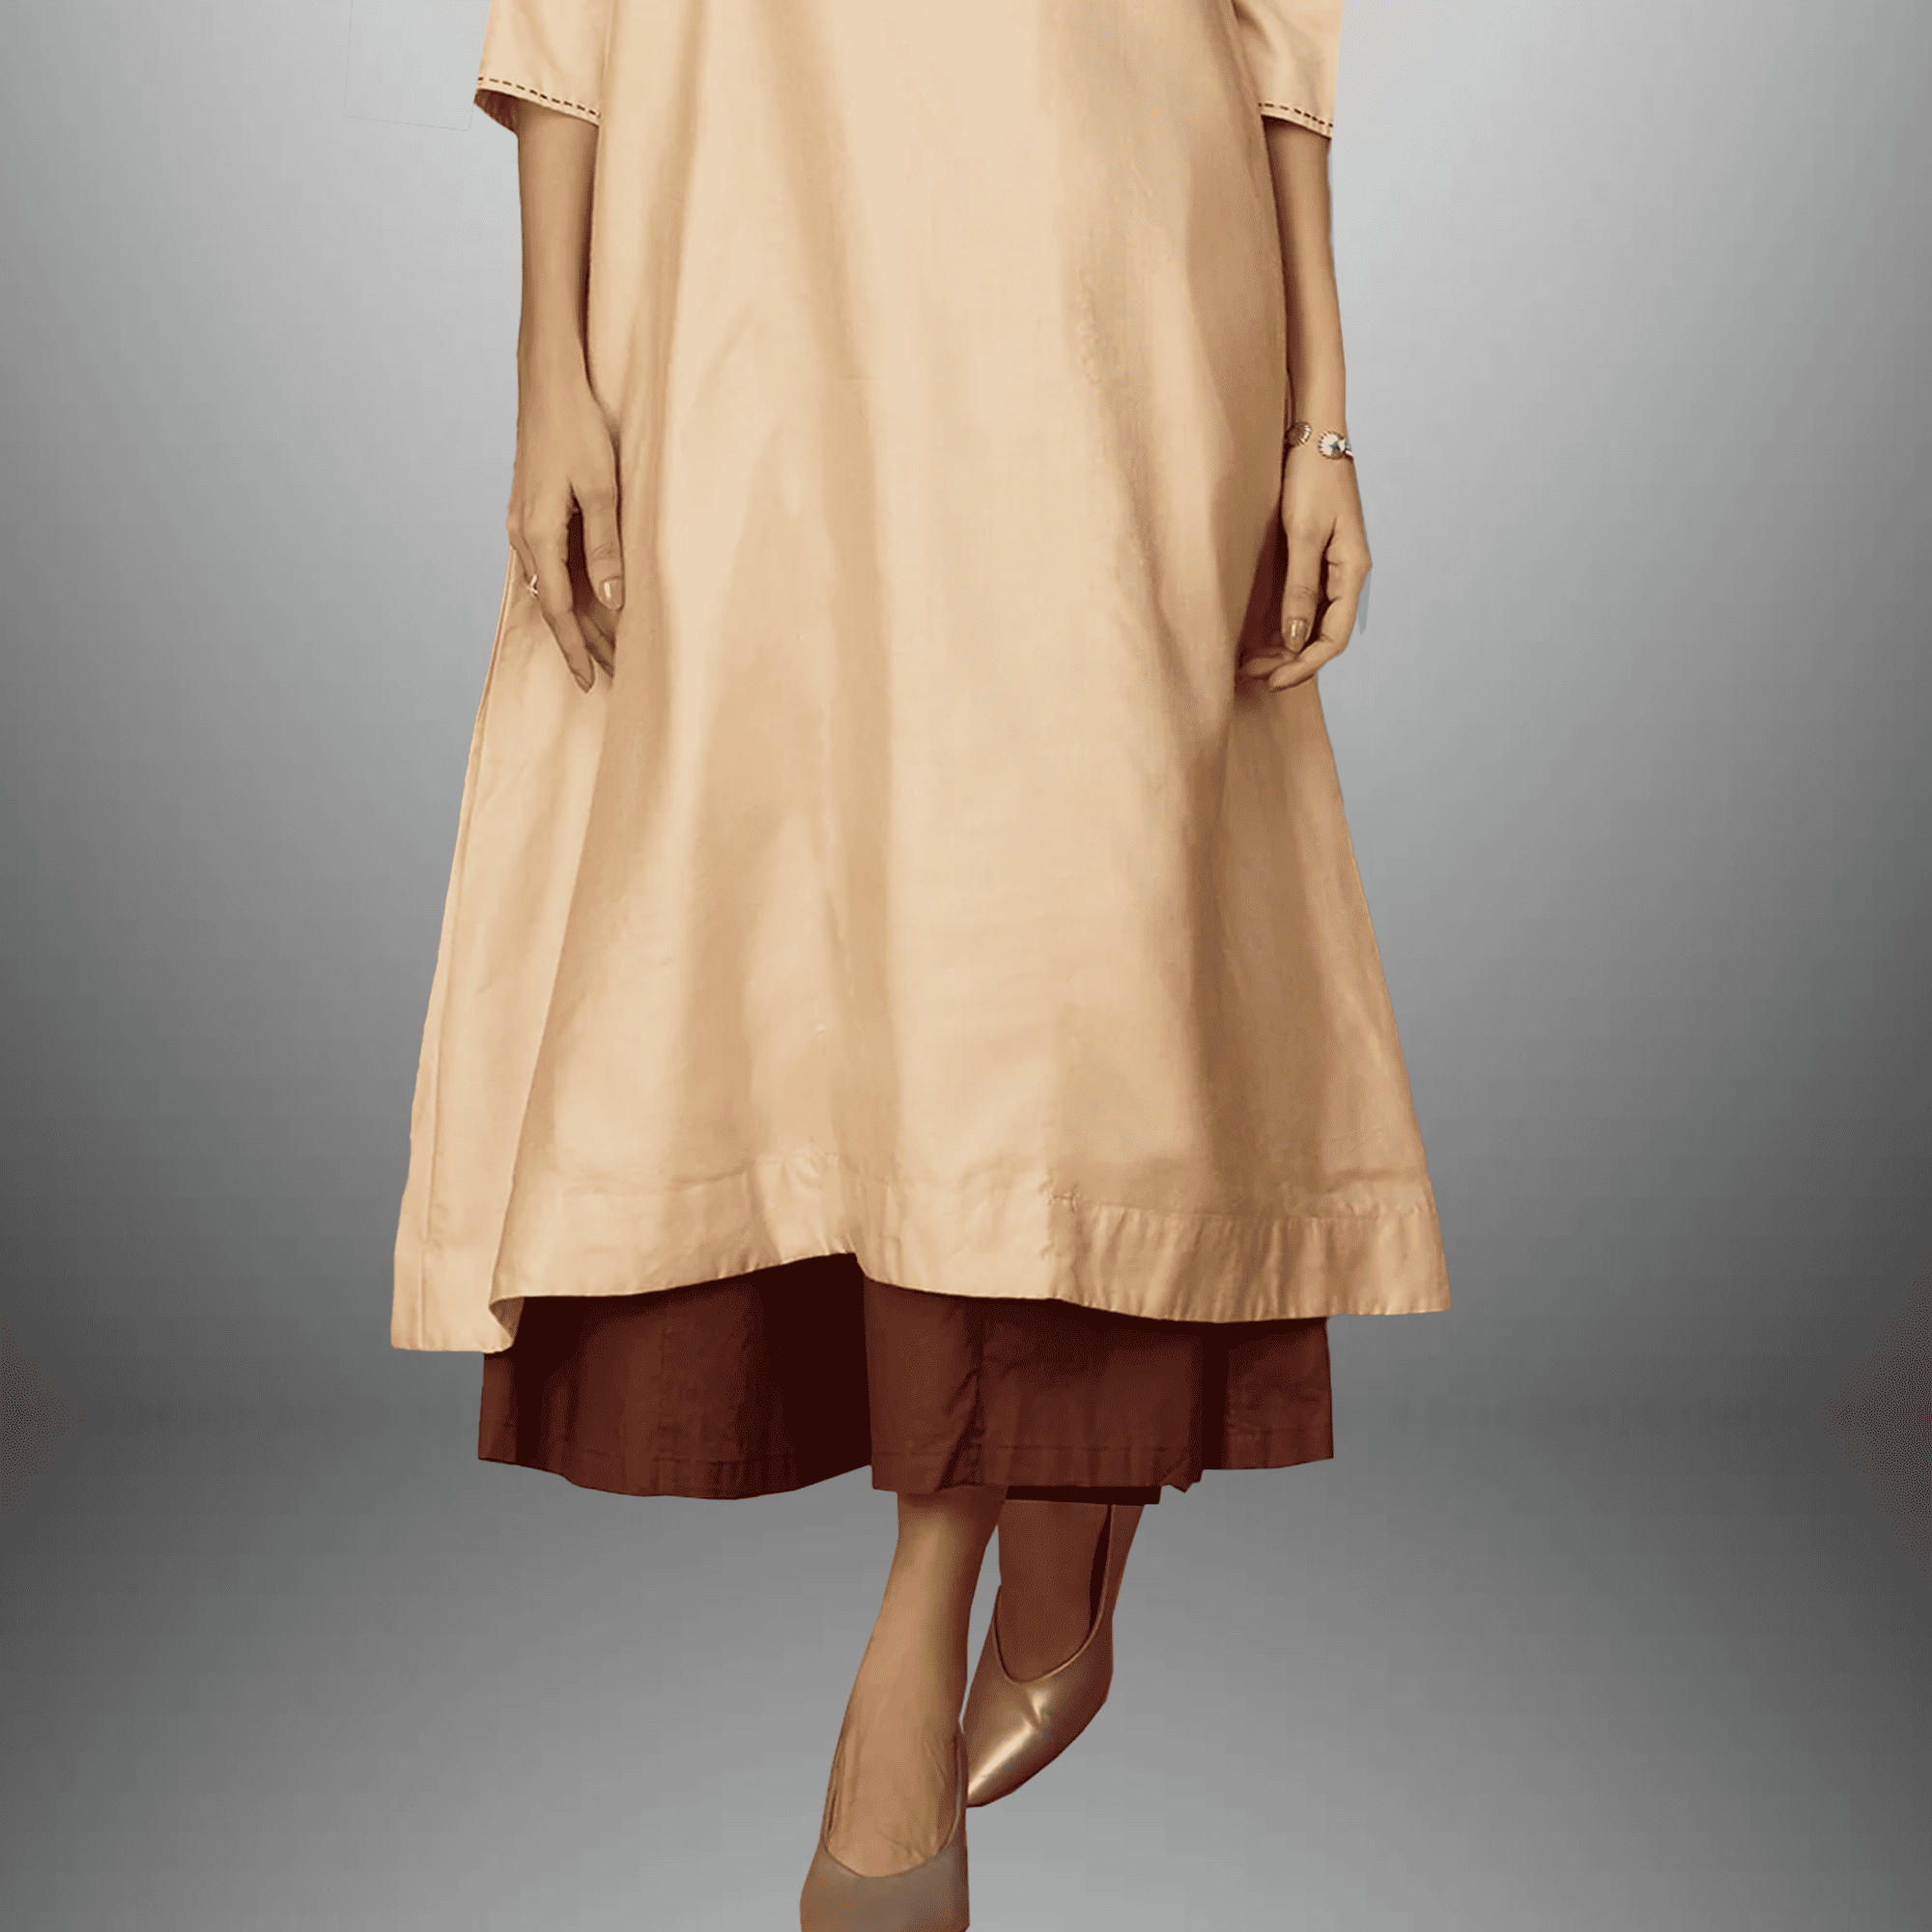 Women's Beige Kurti with Embroidery work on Top and Brown Palazzo-RWKS082